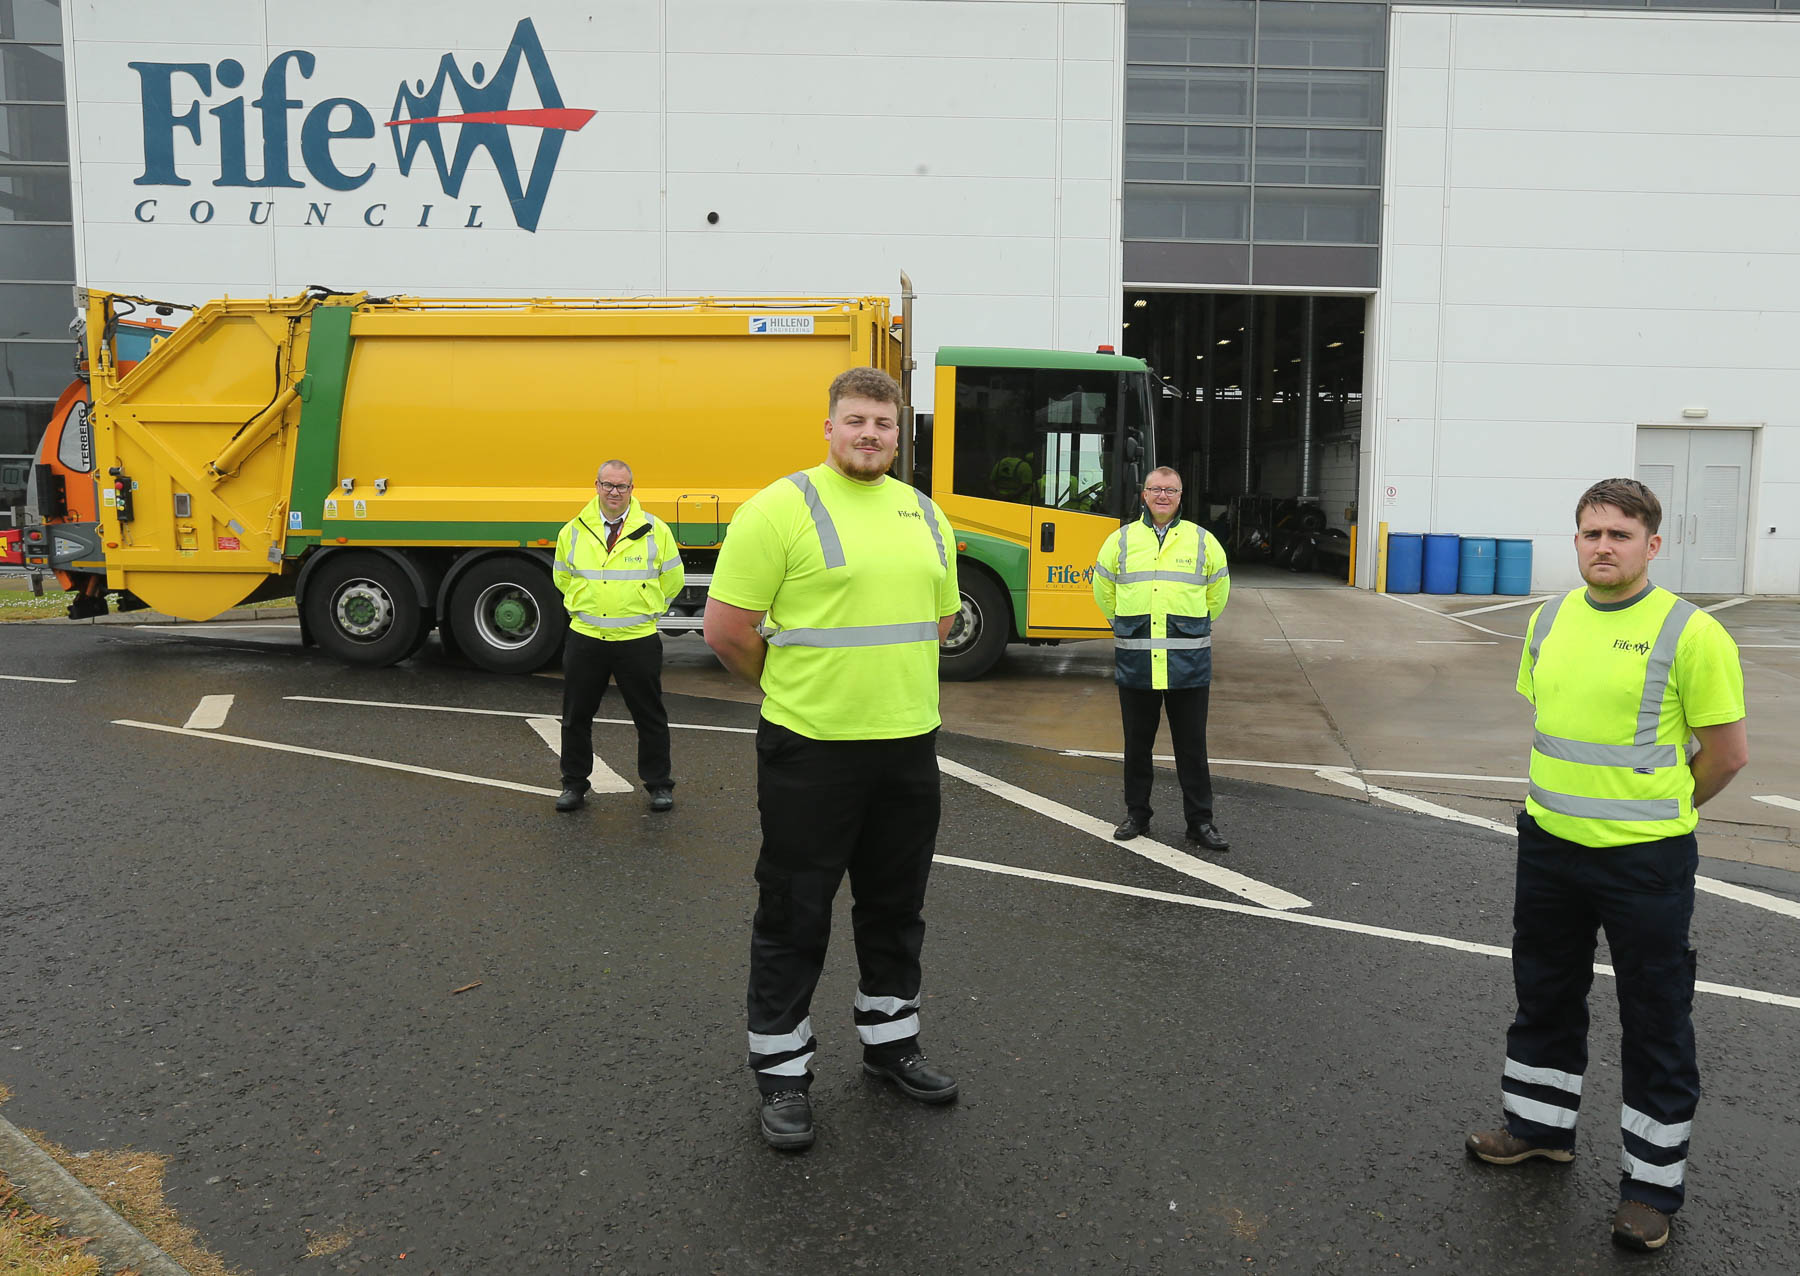 Four service operators standing in front of Bin lorry